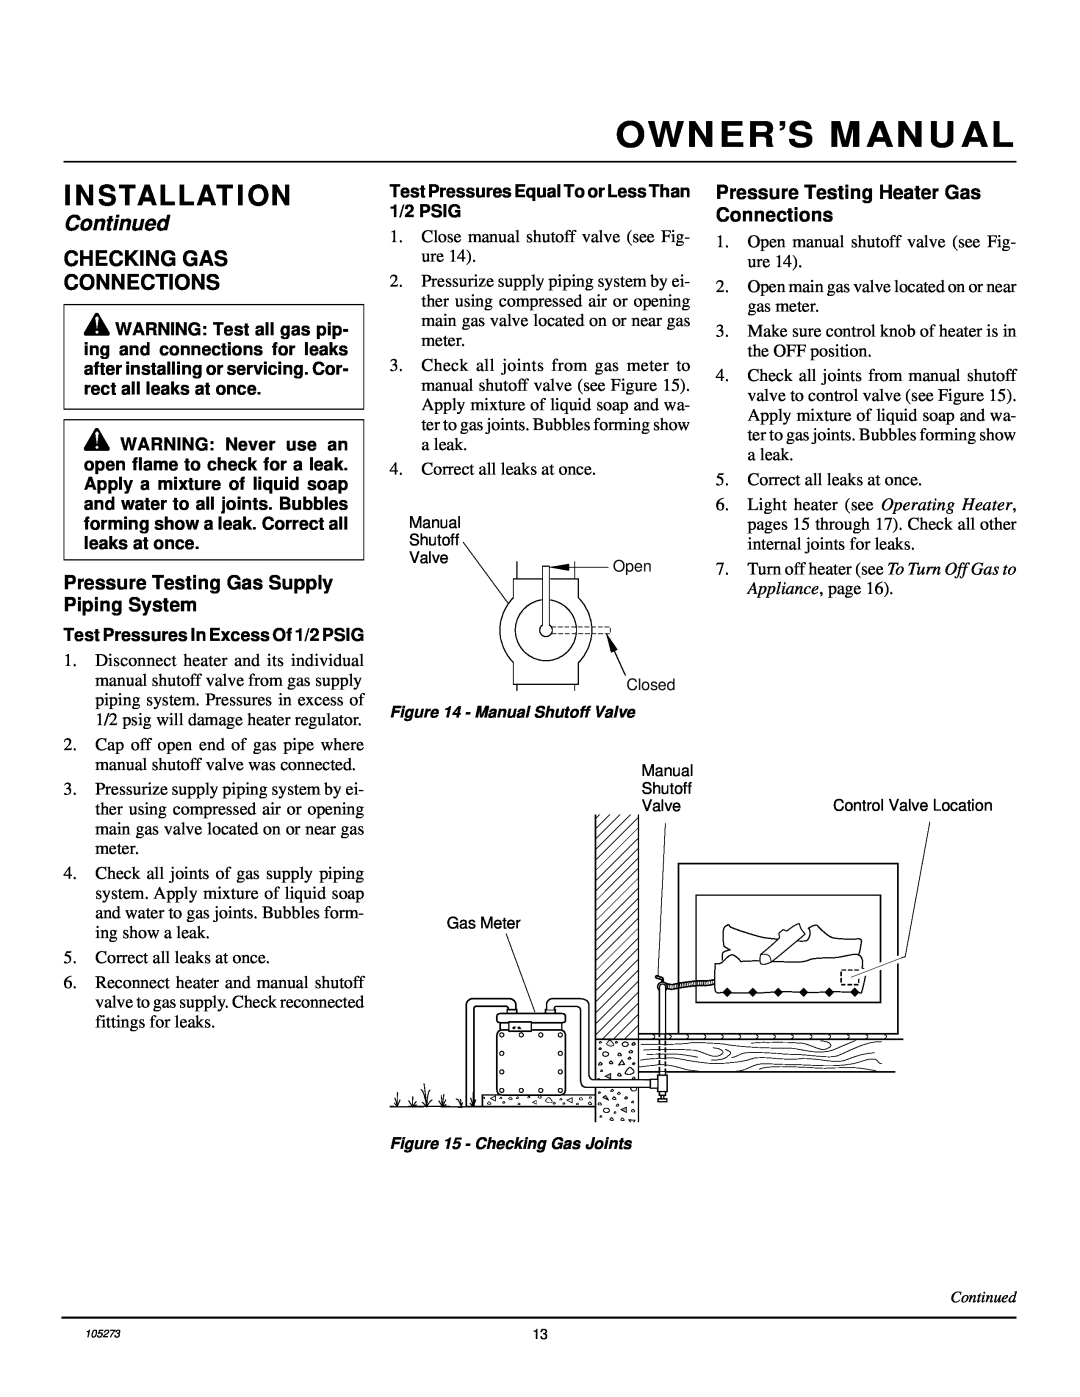 Vanguard Heating UNVENTED (VENT-FREE) NATURAL GAS LOG HEATER installation manual Installation, Continued 